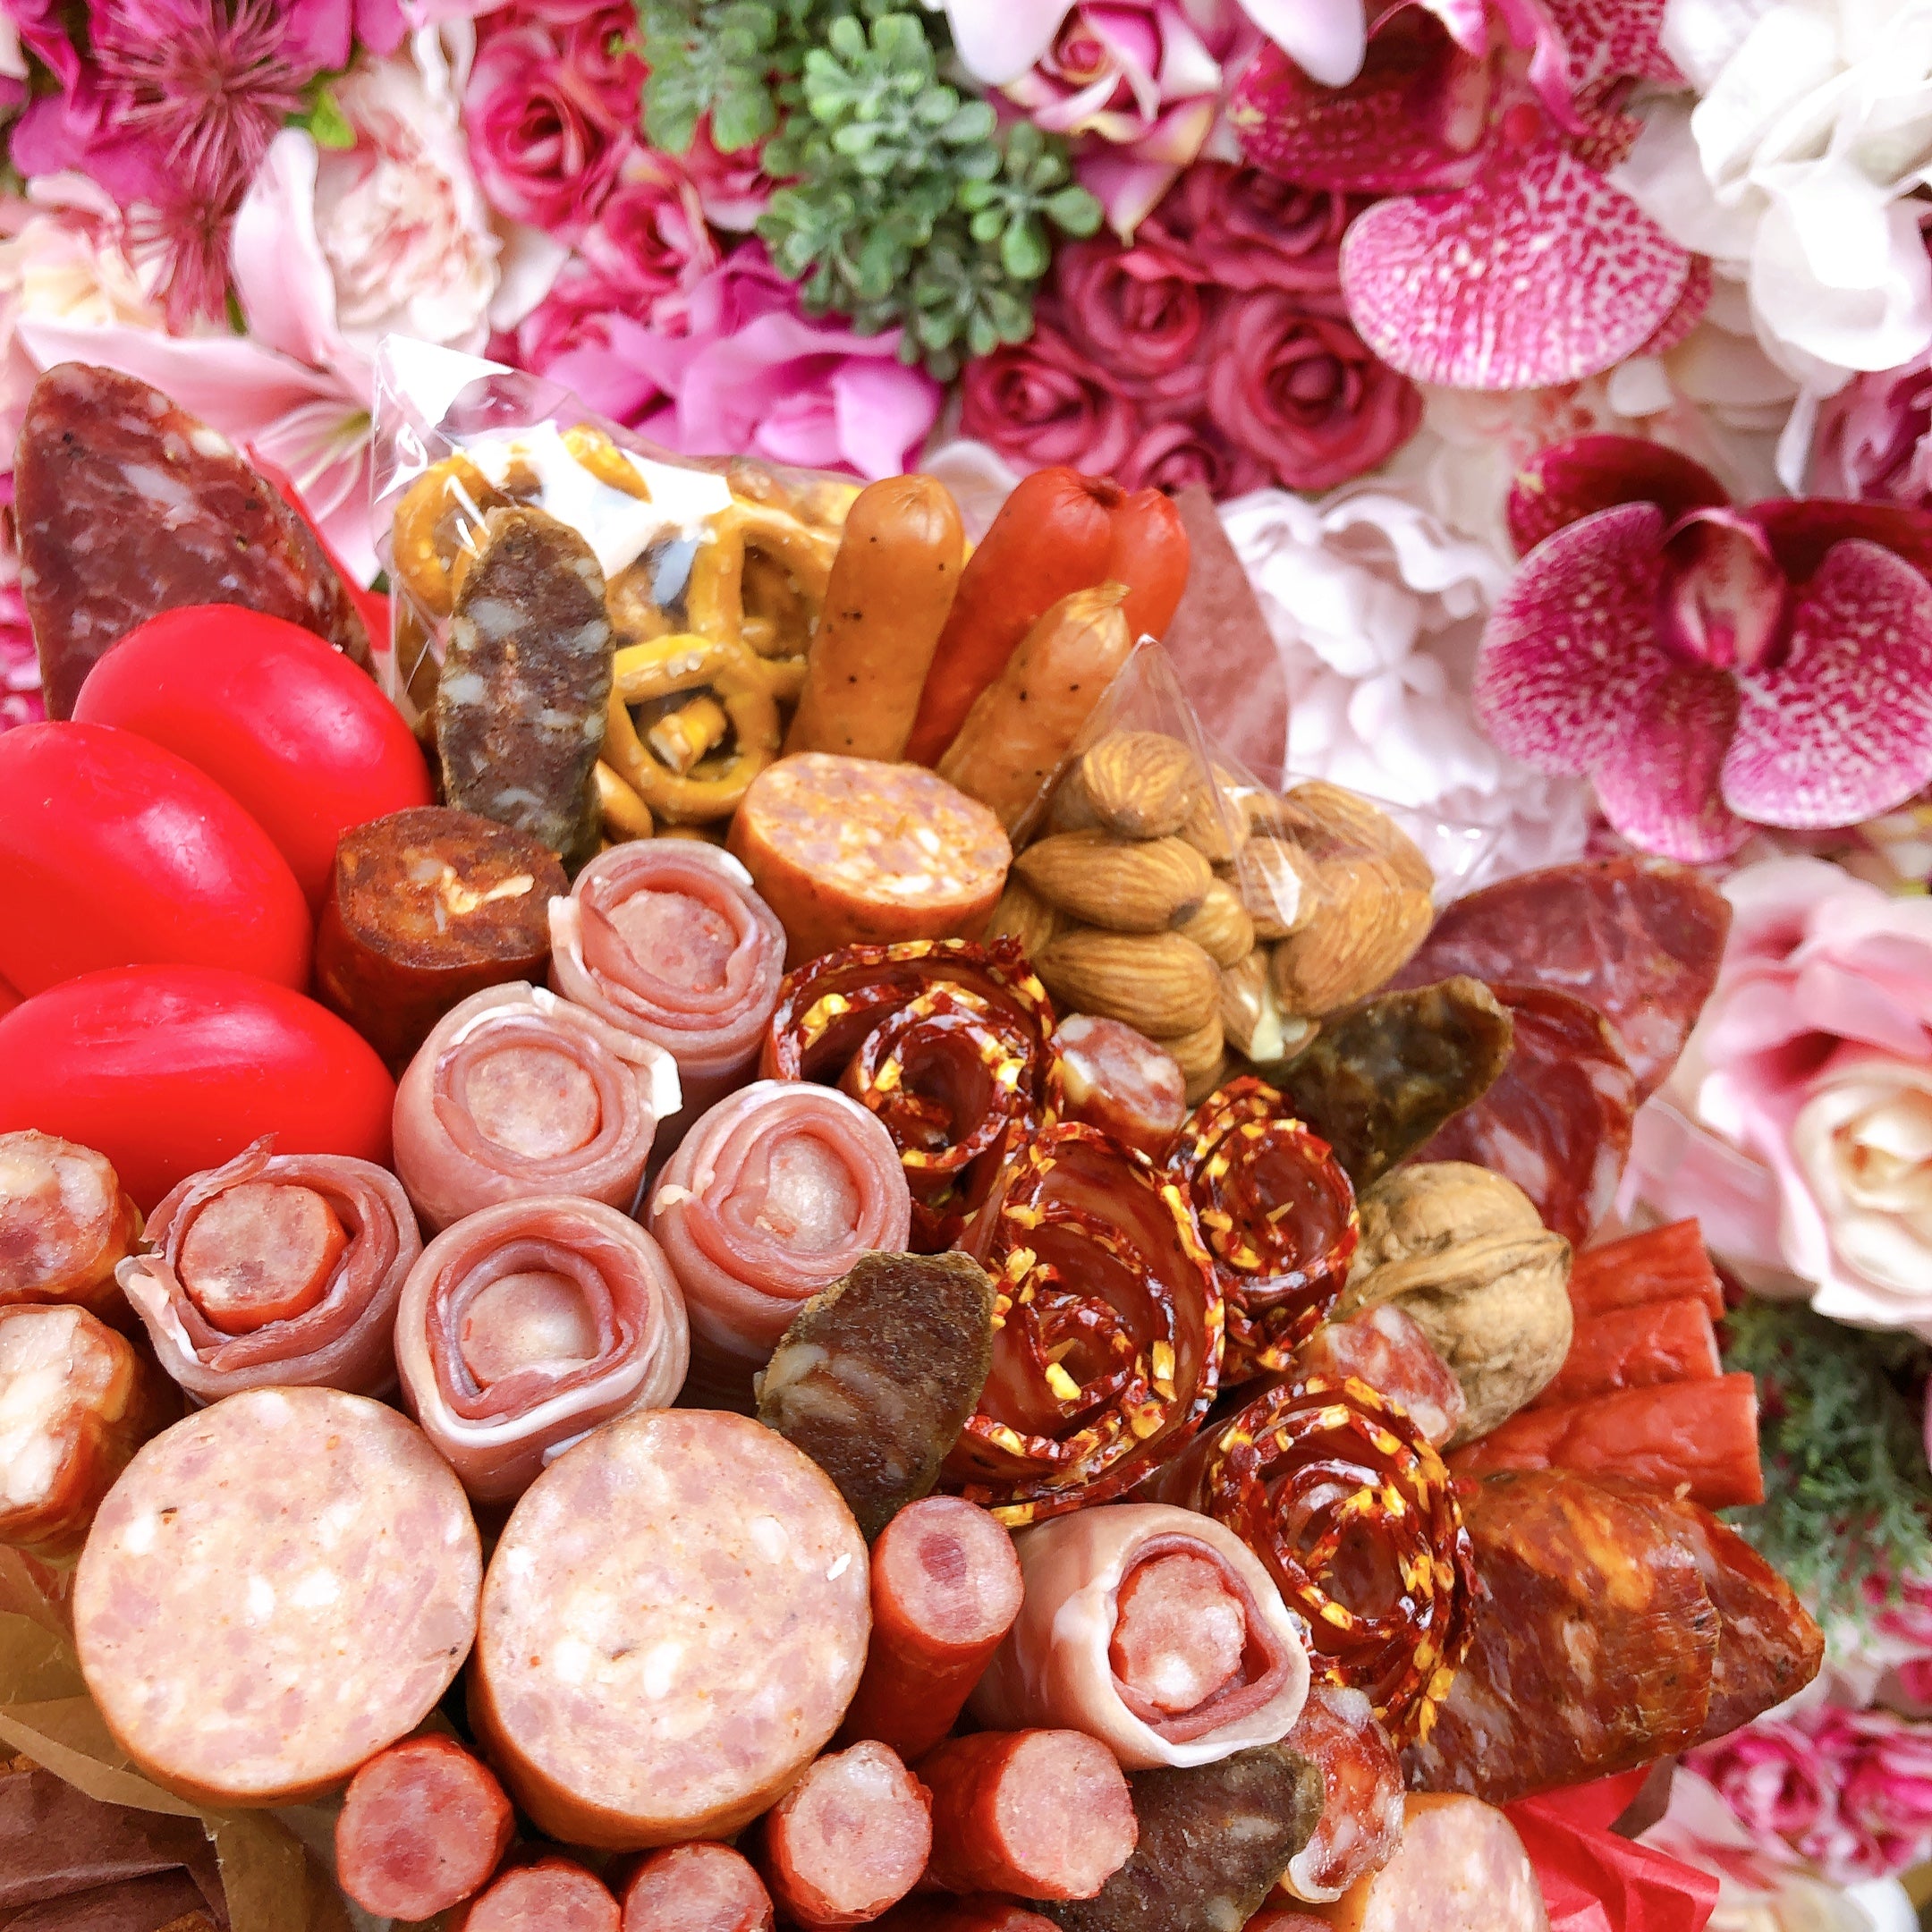 Meat and cheese Bouquet, Gourmet hamper online with salami ham pork Twiggy sticks cheese nuts and pretzels 